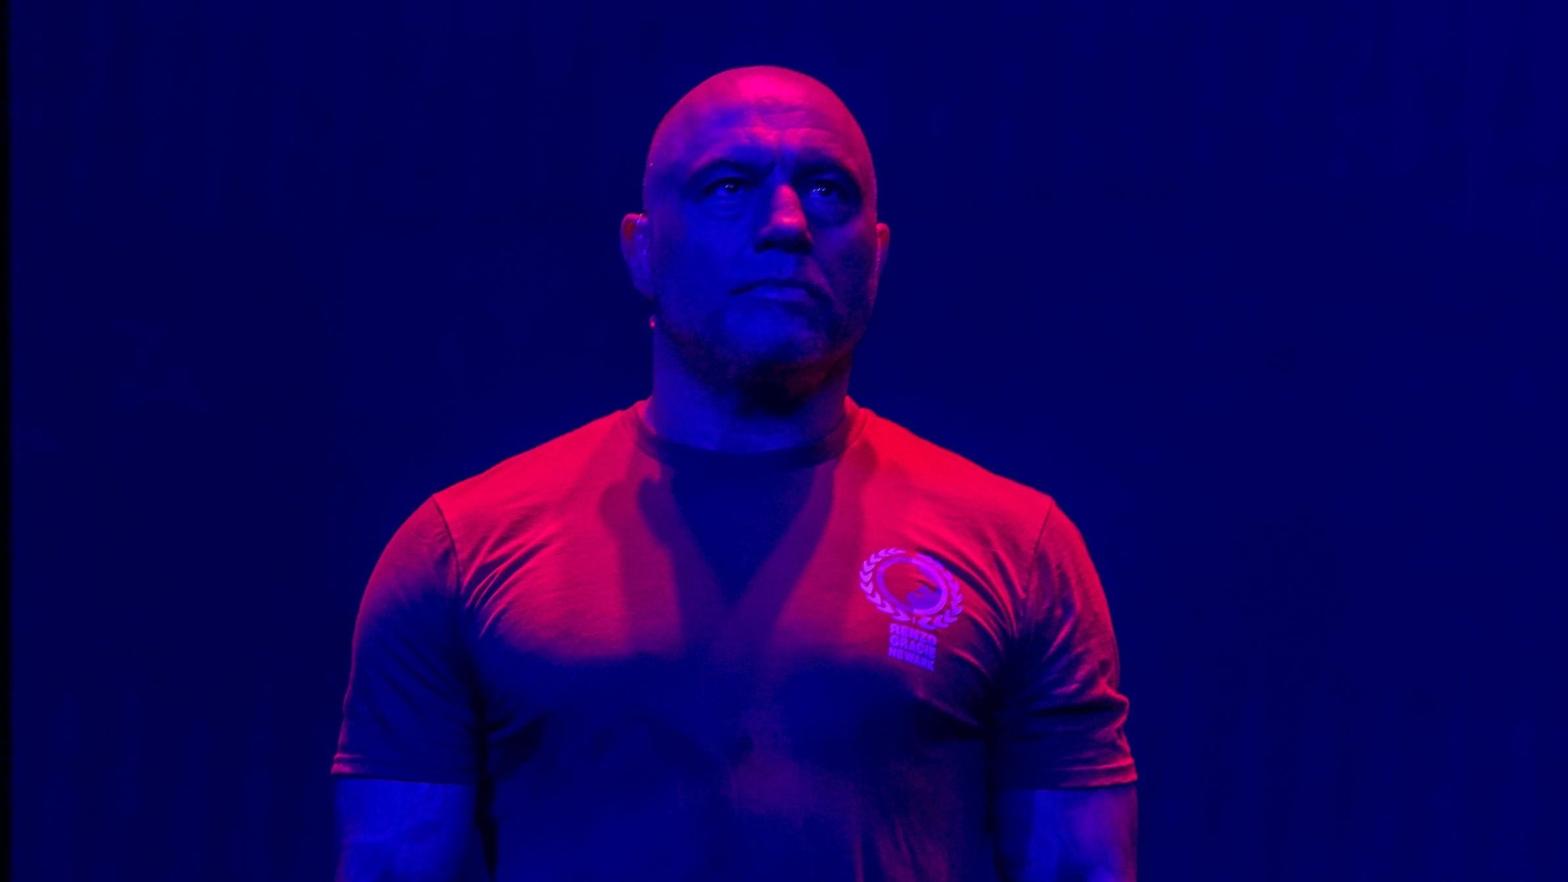 Joe Rogan at the UFC 264 ceremonial weigh-in at T-Mobile Arena on July 9, 2021, in Las Vegas, Nevada. (Photo: Louis Grasse/PxImages/Icon Sportswire, Getty Images)